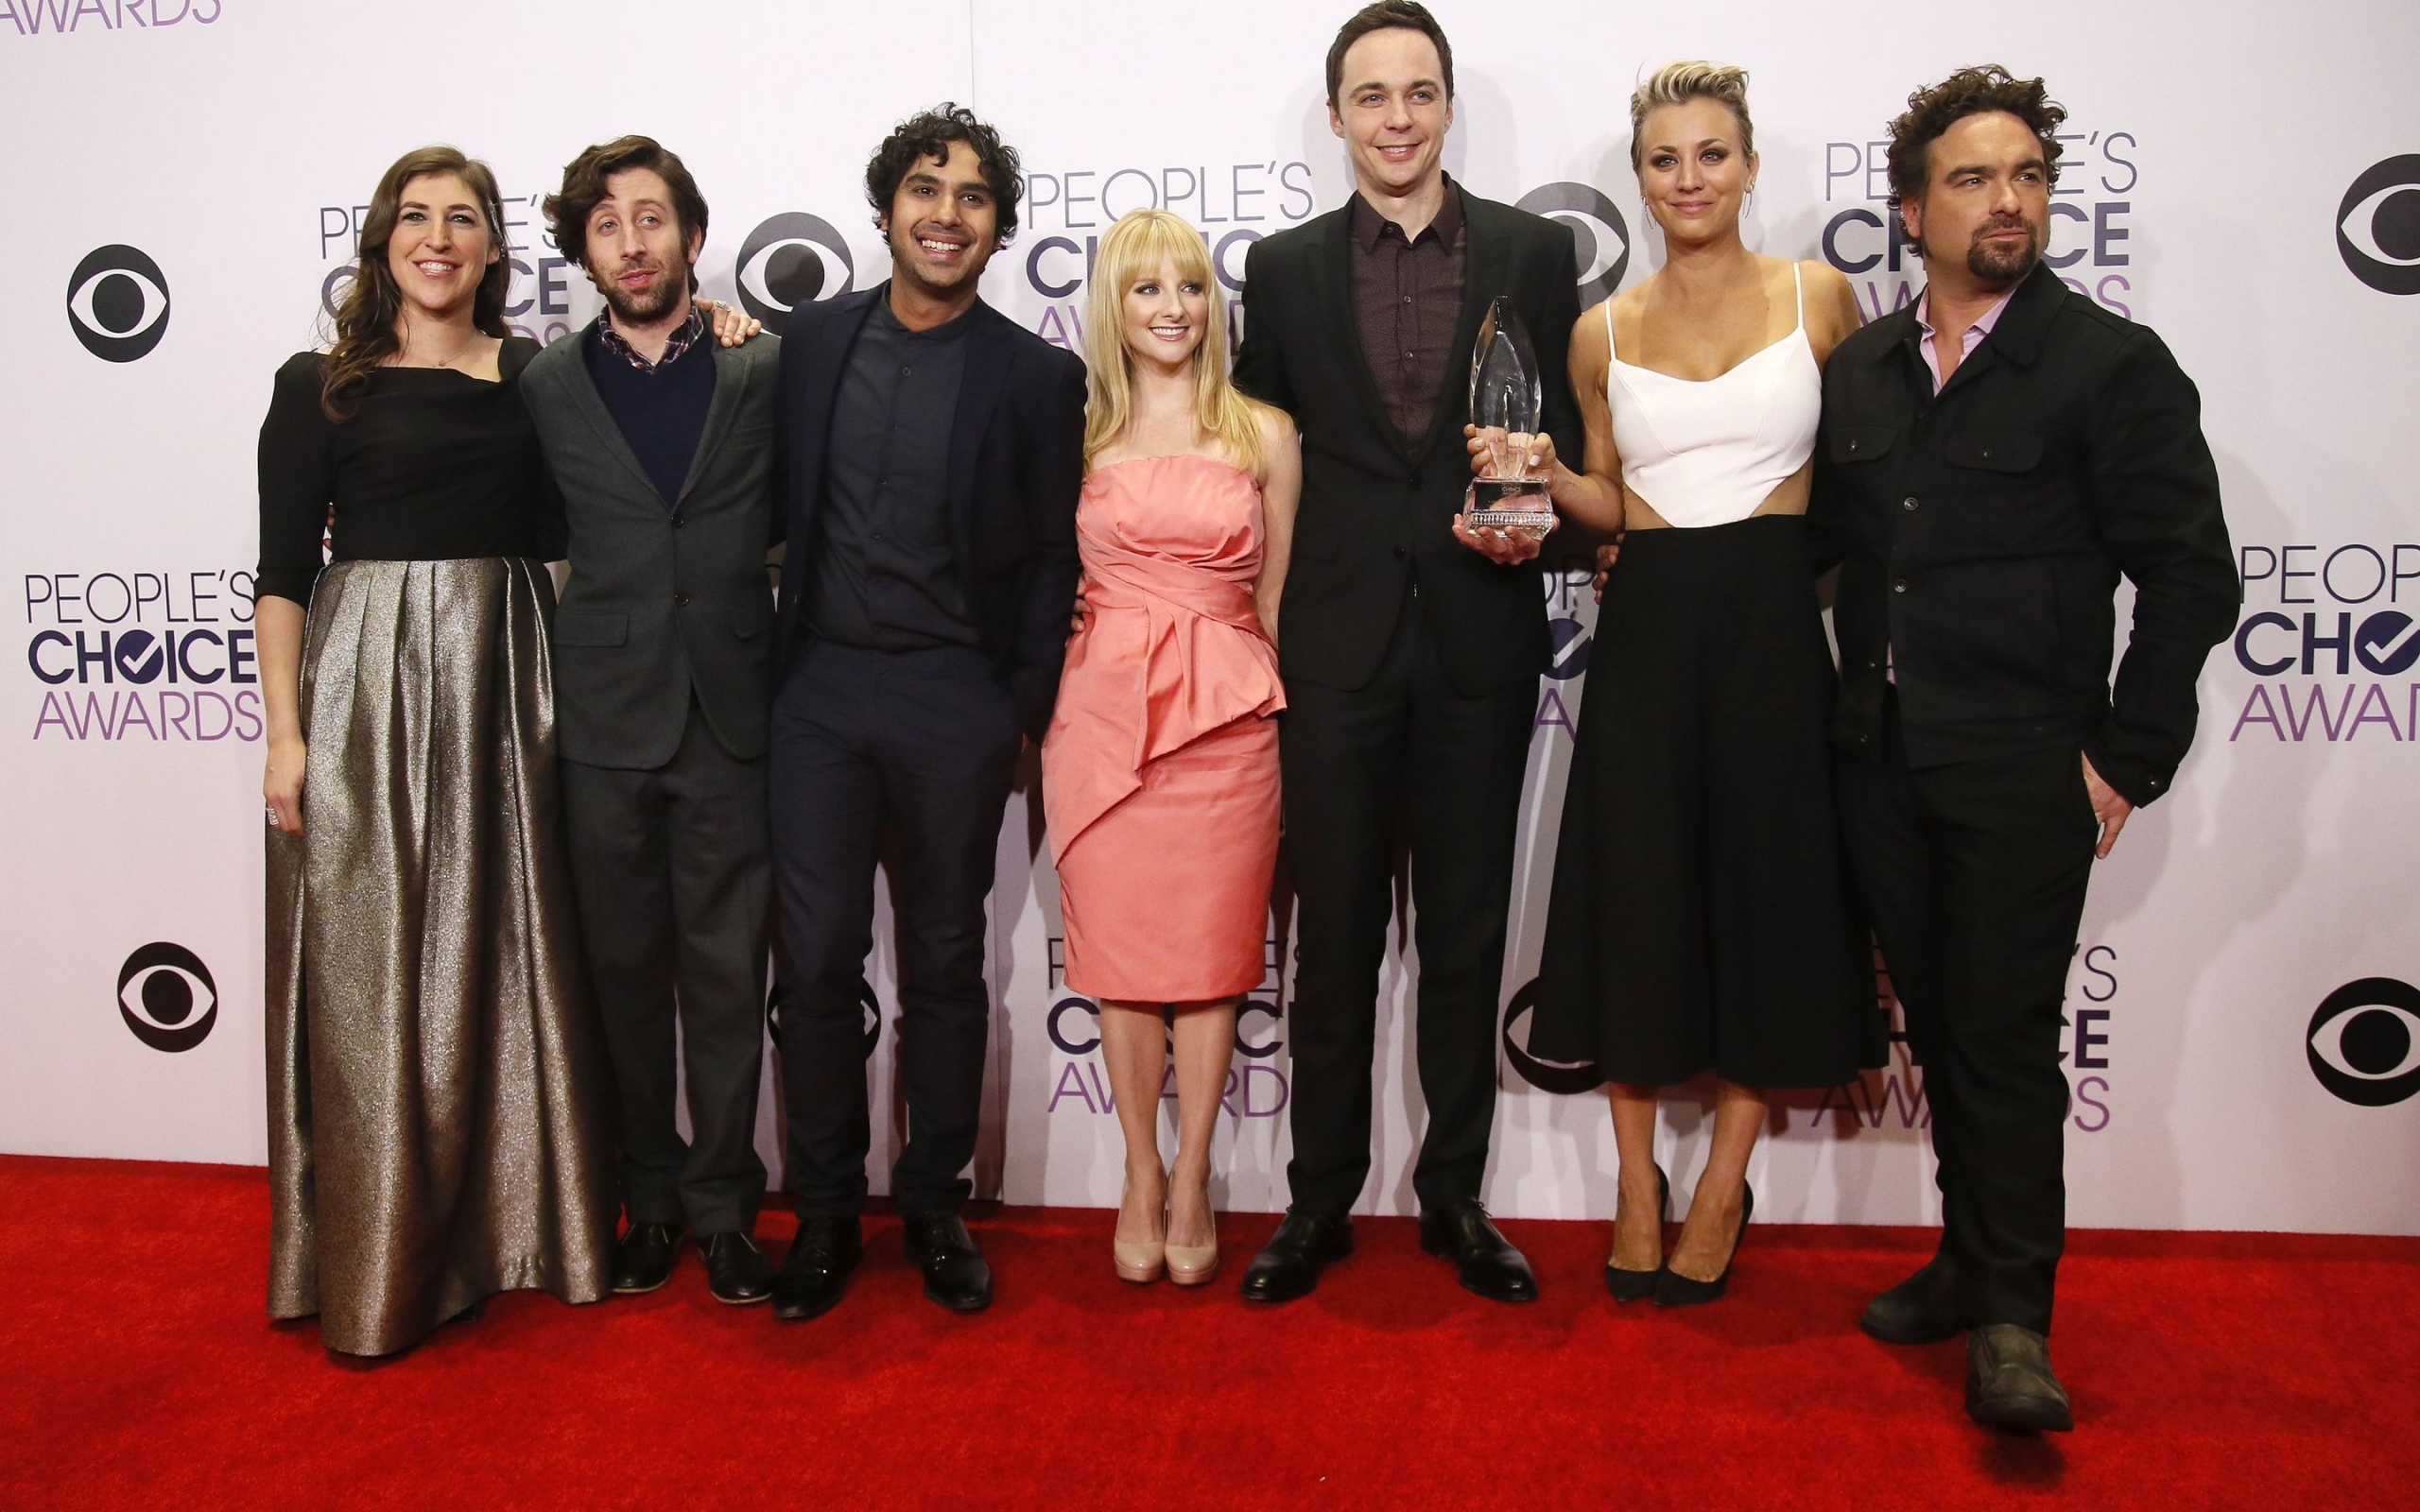 The Big Bang Theory Peoples Choice Awards for 2560 x 1600 widescreen resolution